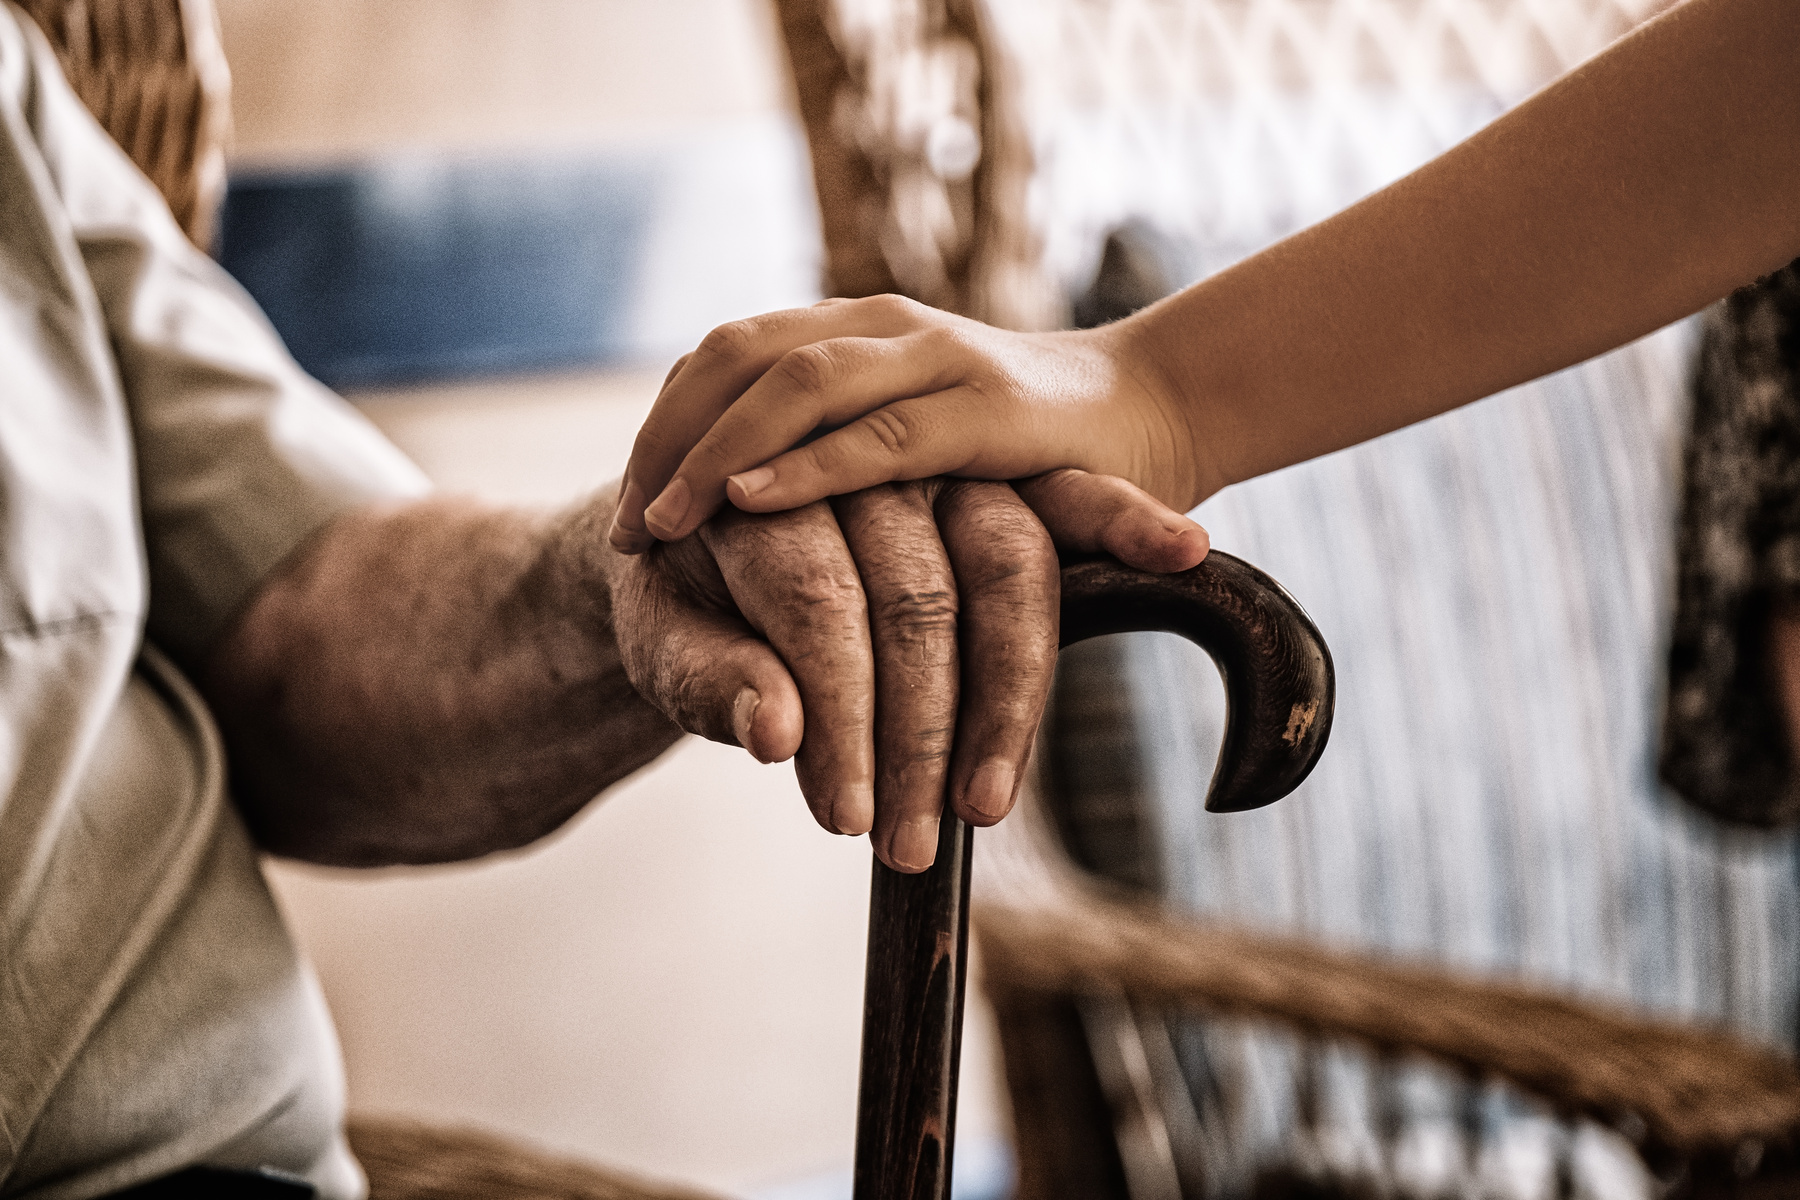 An older person's hand resting on a cane, with a younger hand laid gently on top